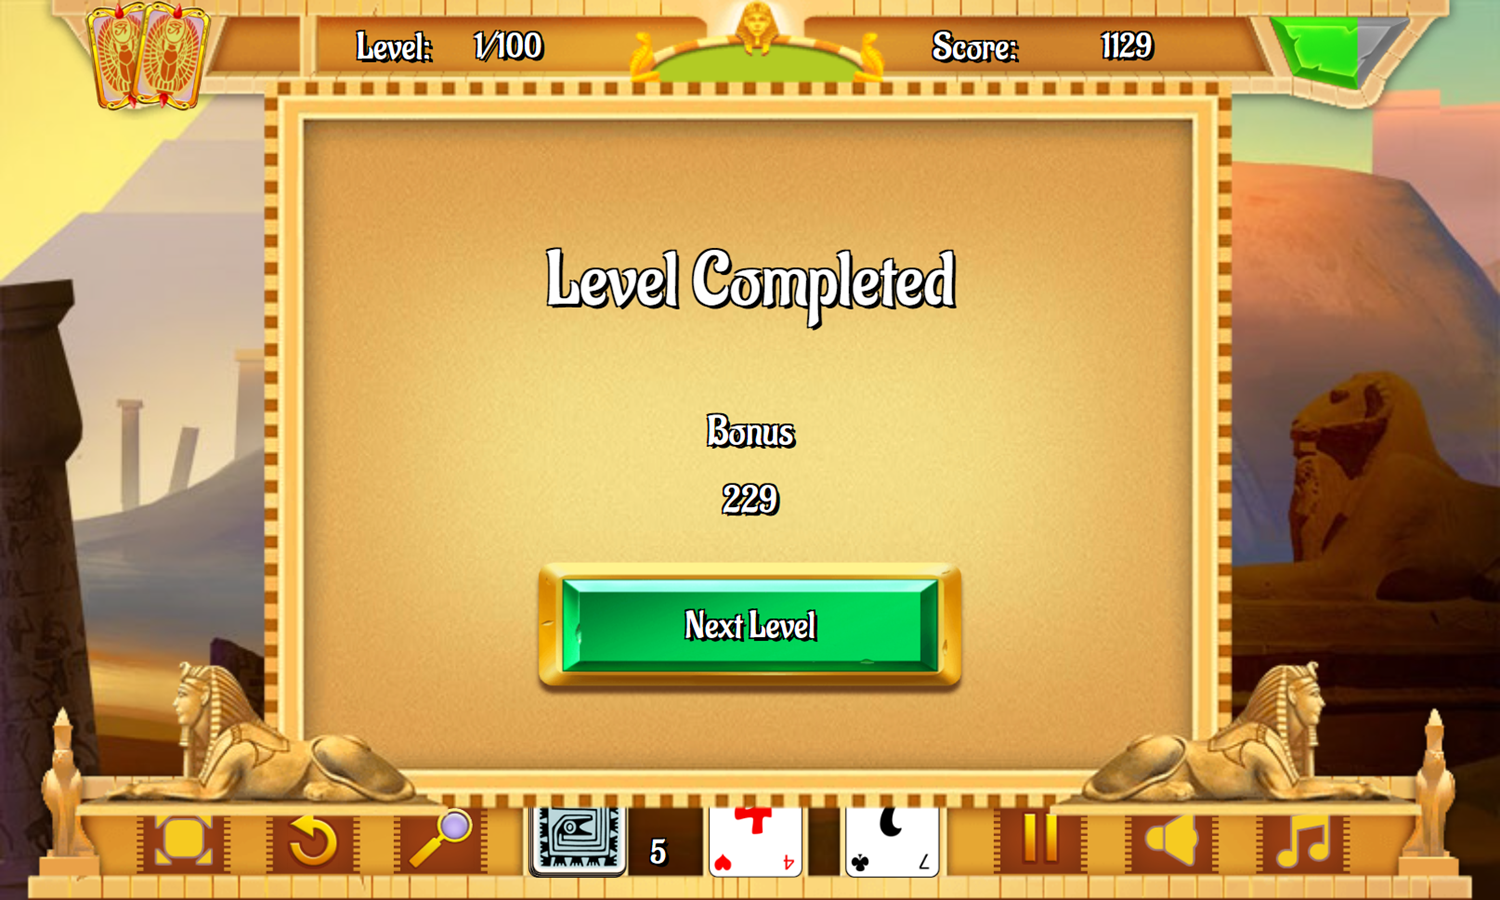 Egypt Solitaire Game Level Completed Screenshot.